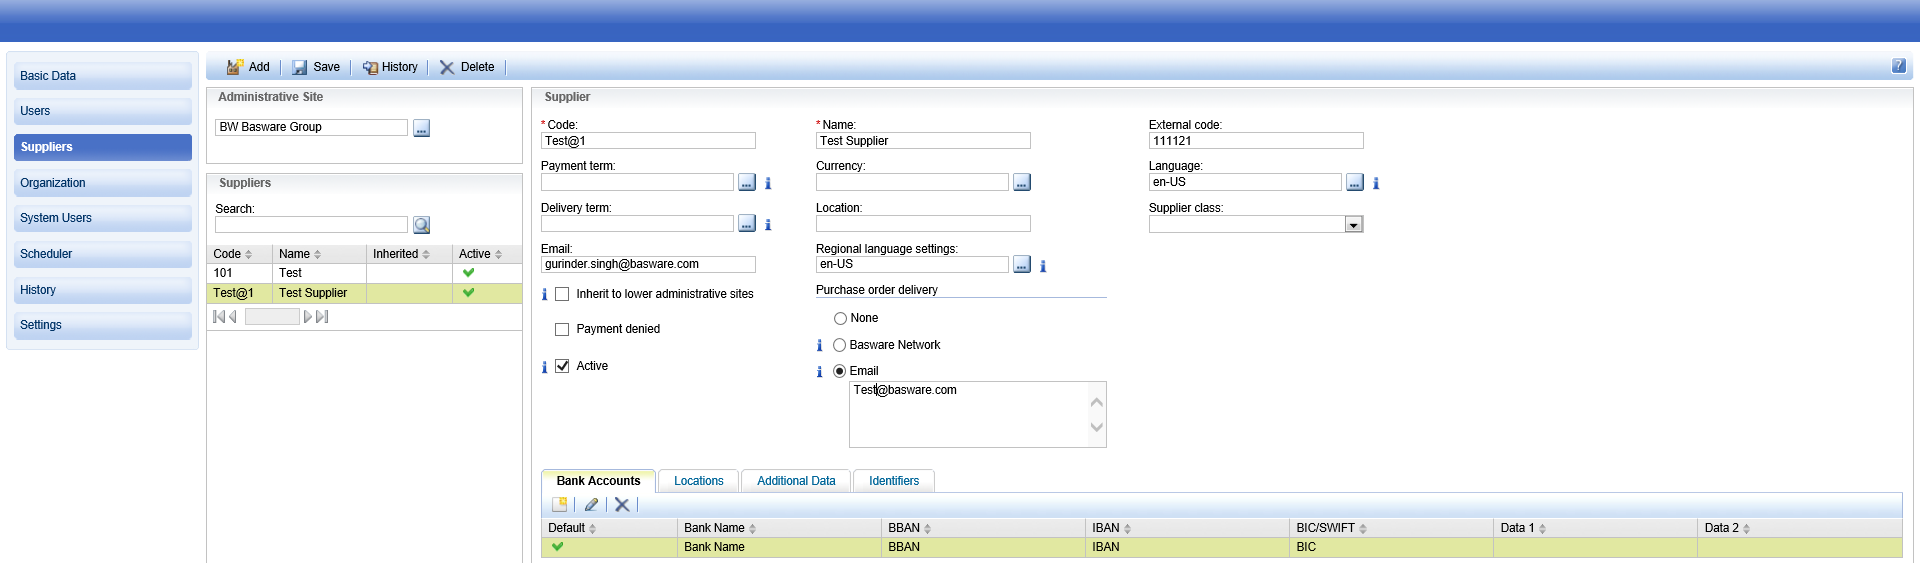 Supplier settings page in P2P Administration